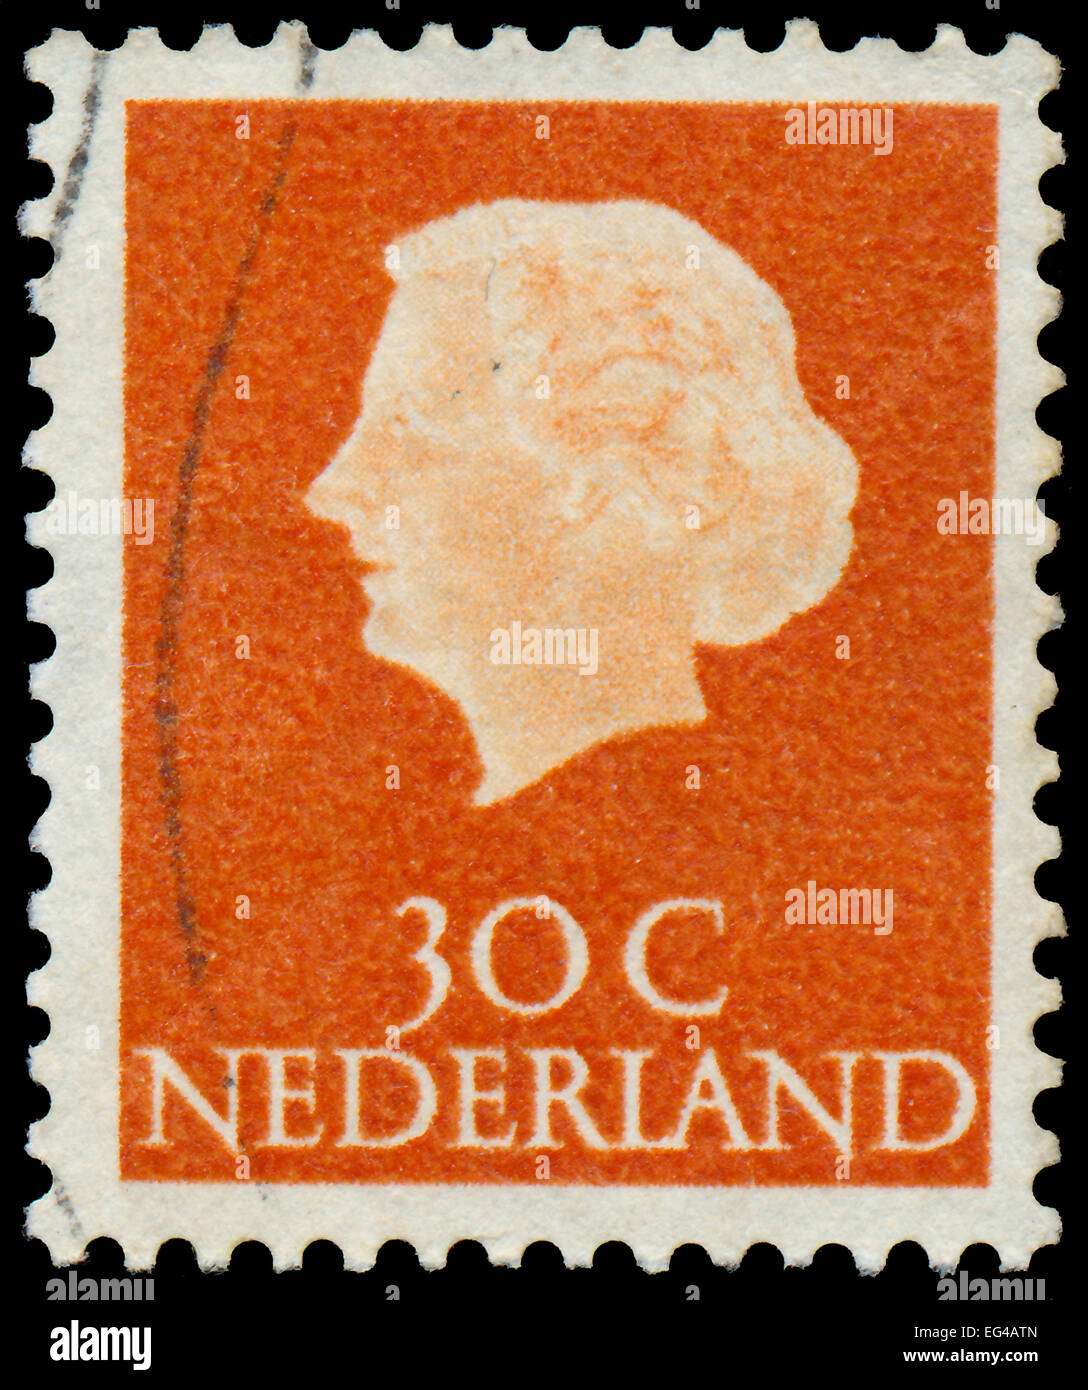 NETHERLANDS - CIRCA 1953: A stamp printed in Netherlands shows portrait of Queen Juliana (1909-2004) was the Queen regnant of th Stock Photo